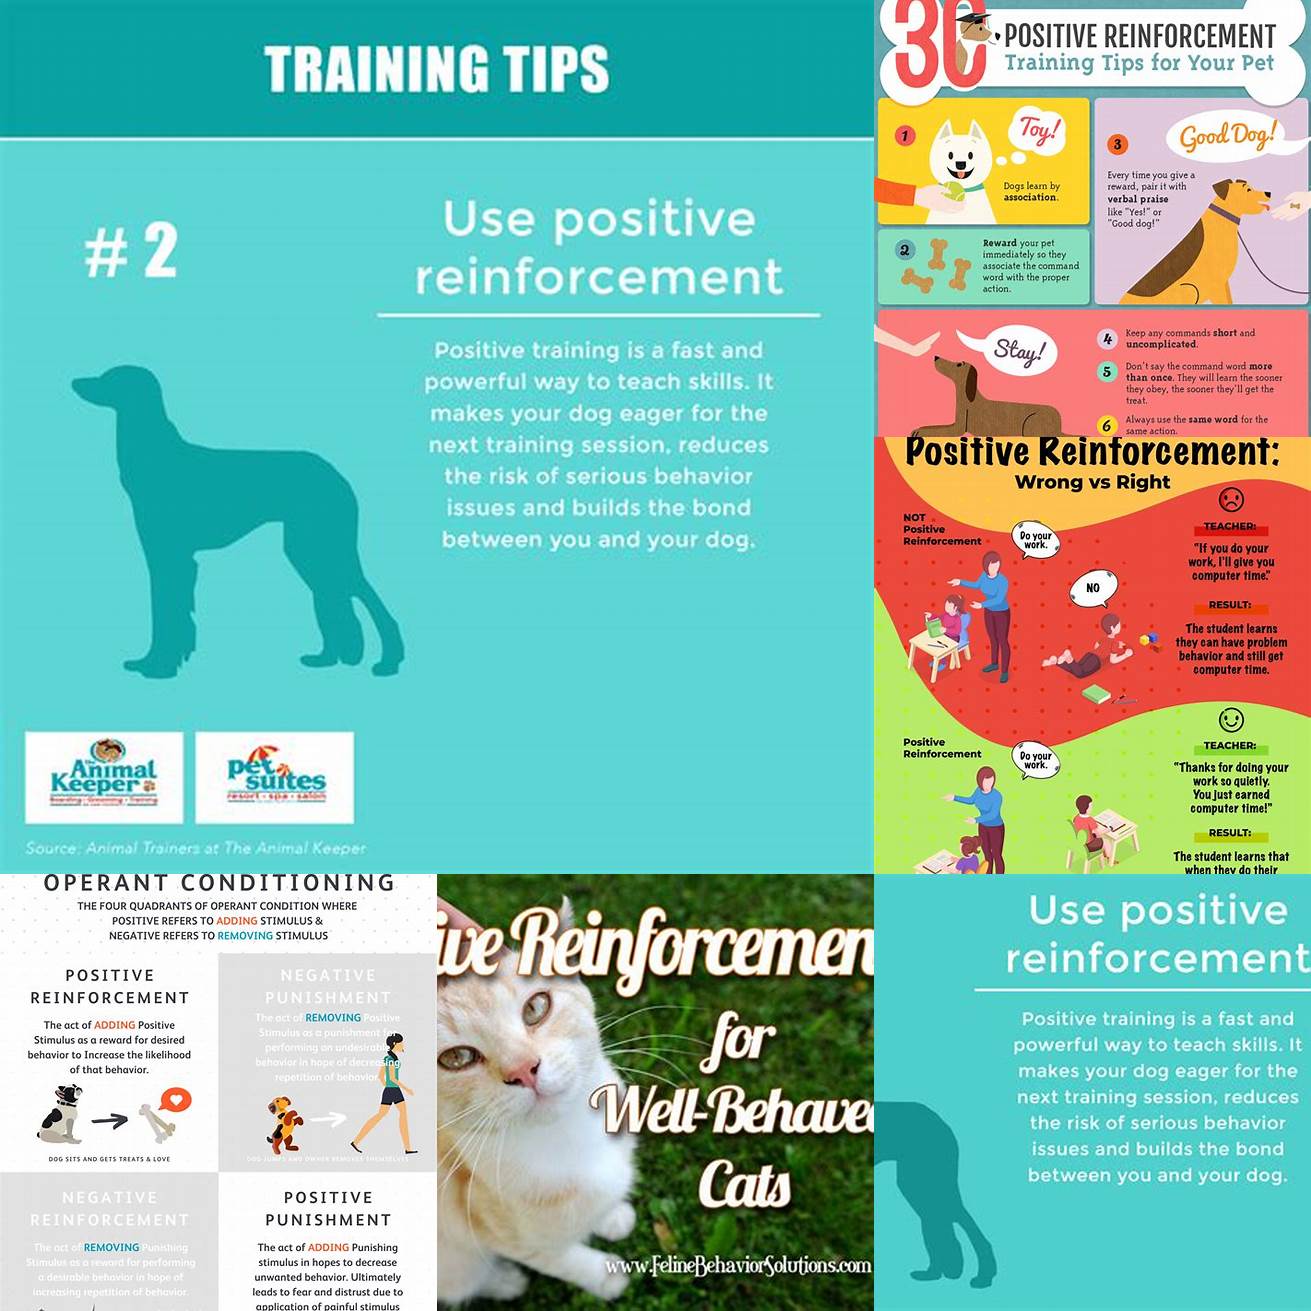 Use positive reinforcement training to encourage good behavior and discourage aggression Reward your cats for calm non-aggressive behavior towards each other